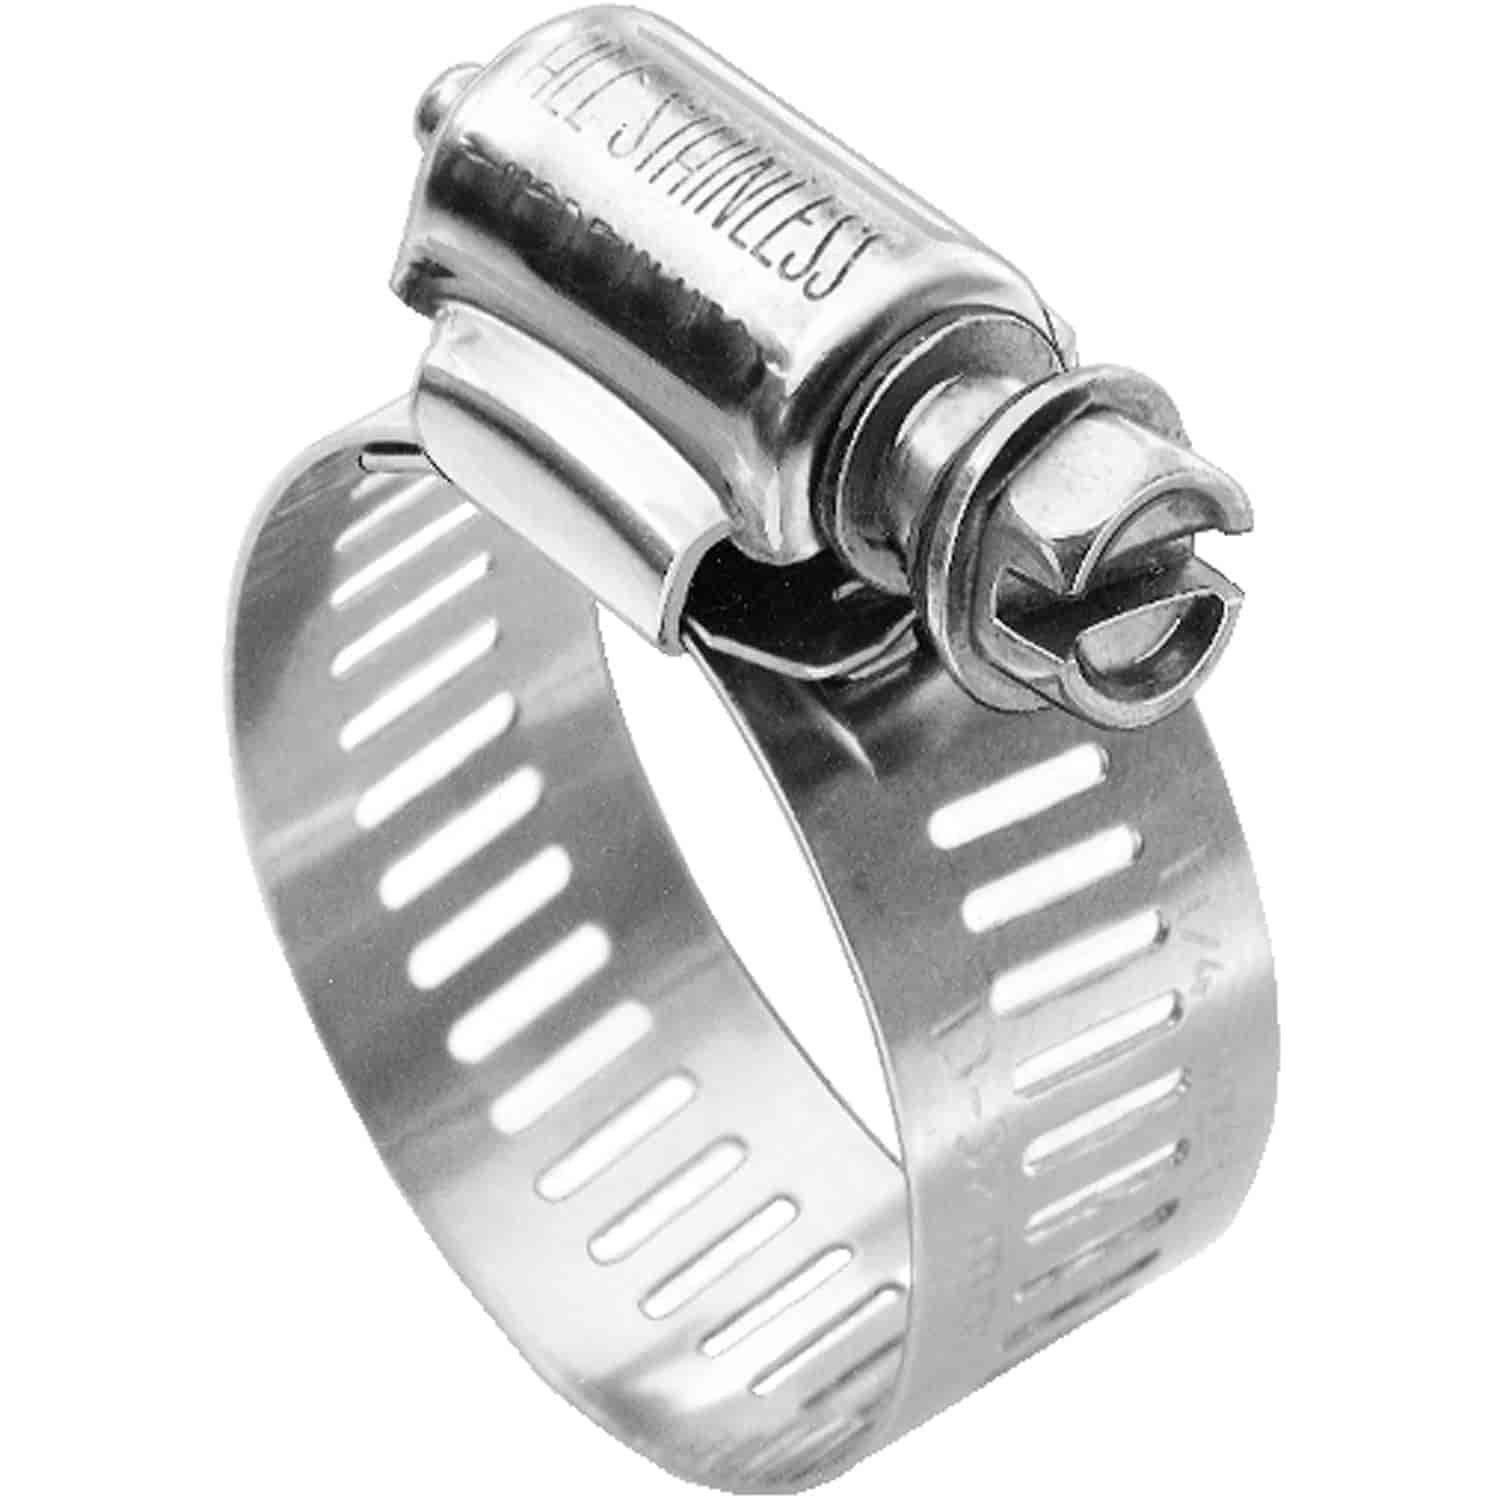 Stainless Steel Hose Clamp [7 in. to 4